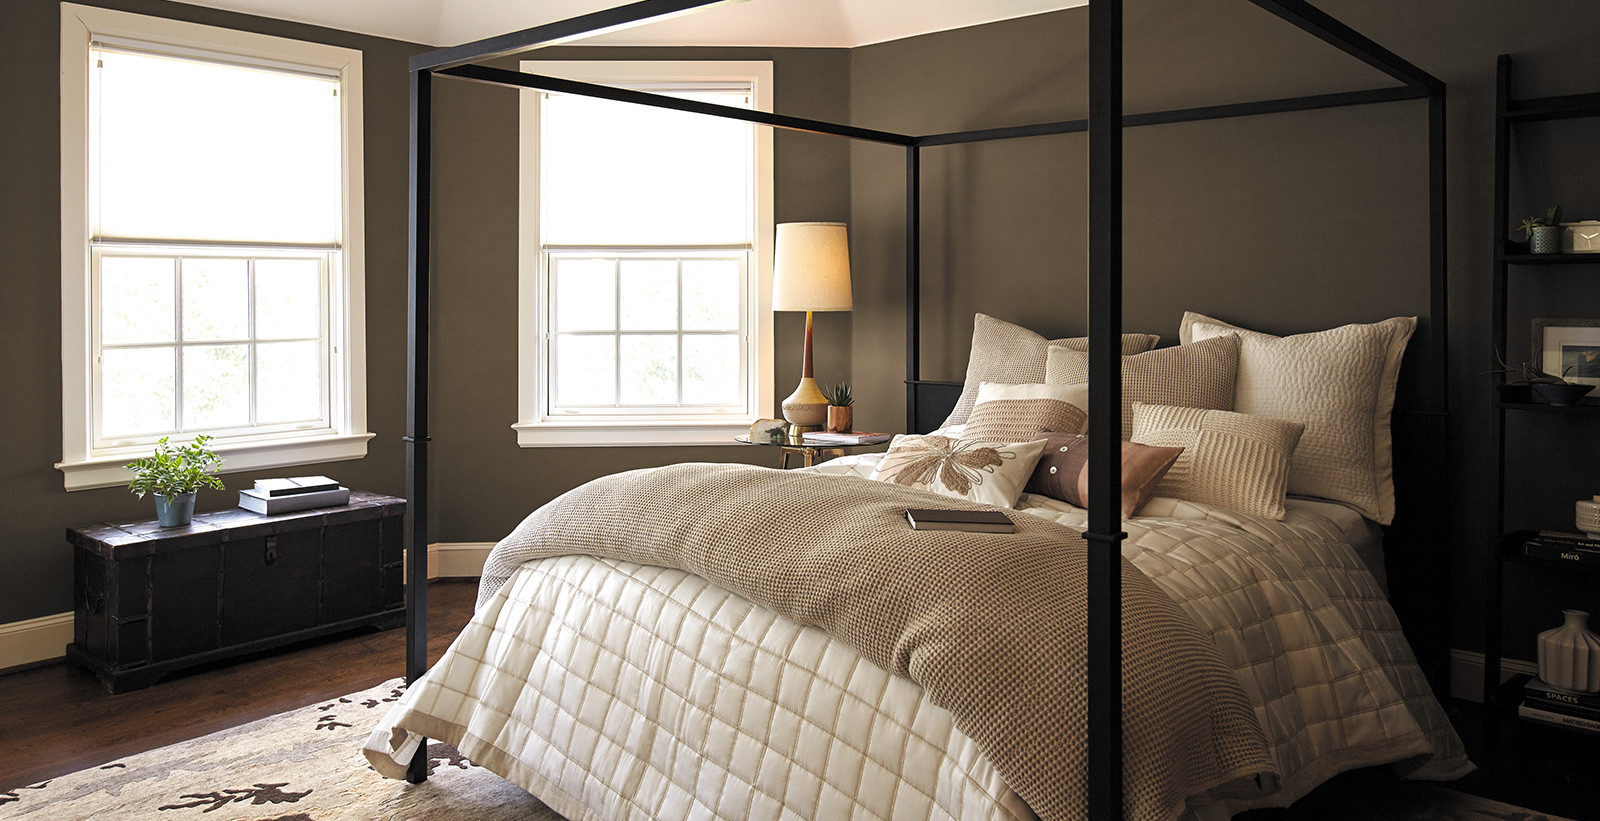 Behr Bedroom Colors
 fortable Bedroom Inspirational Paint Colors